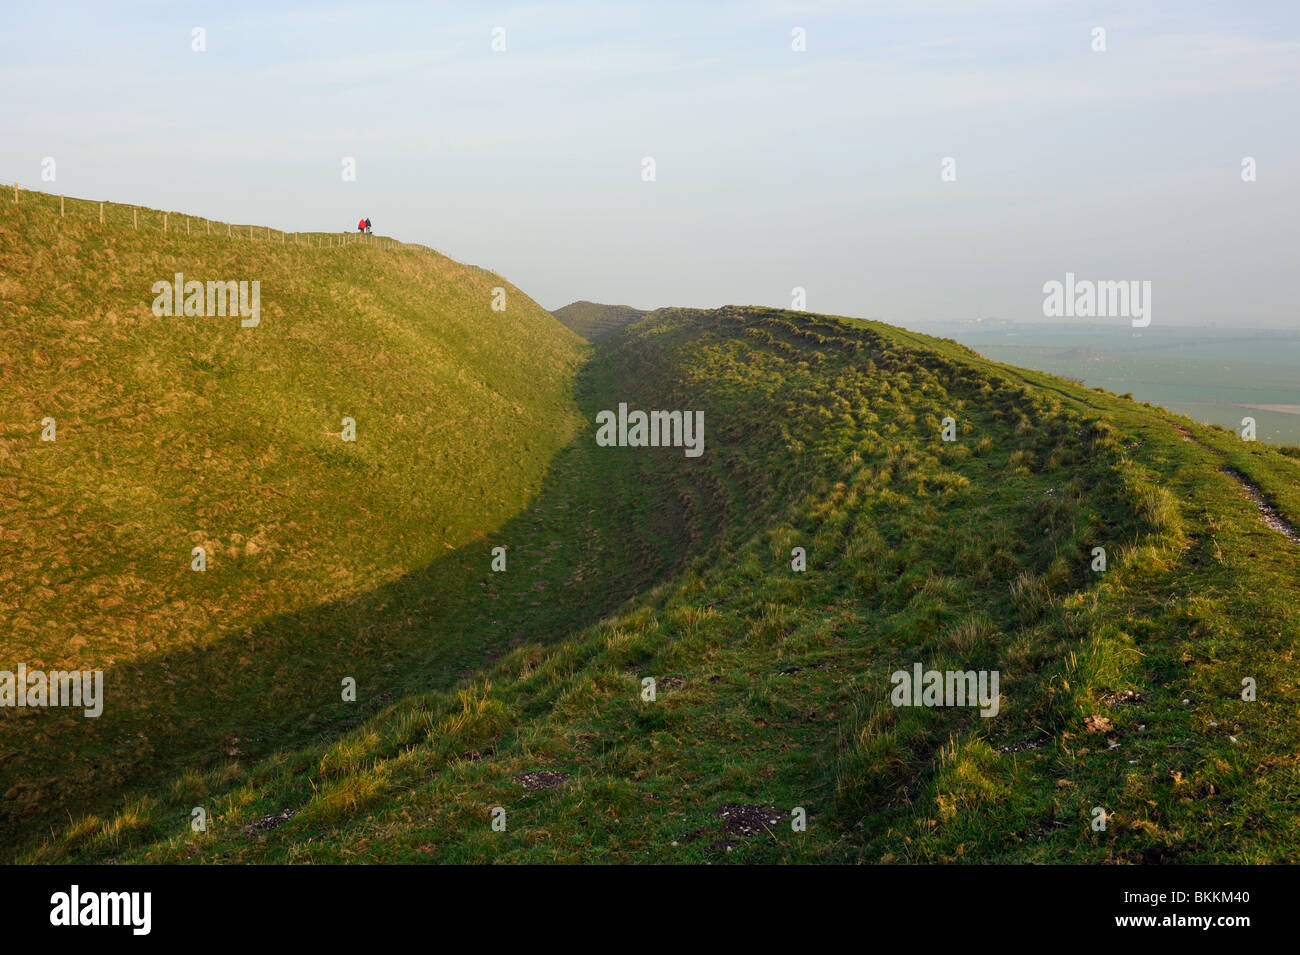 Walkers on sky line. Maiden castle Dorset at sunrise. Iron age hill fort. Stock Photo